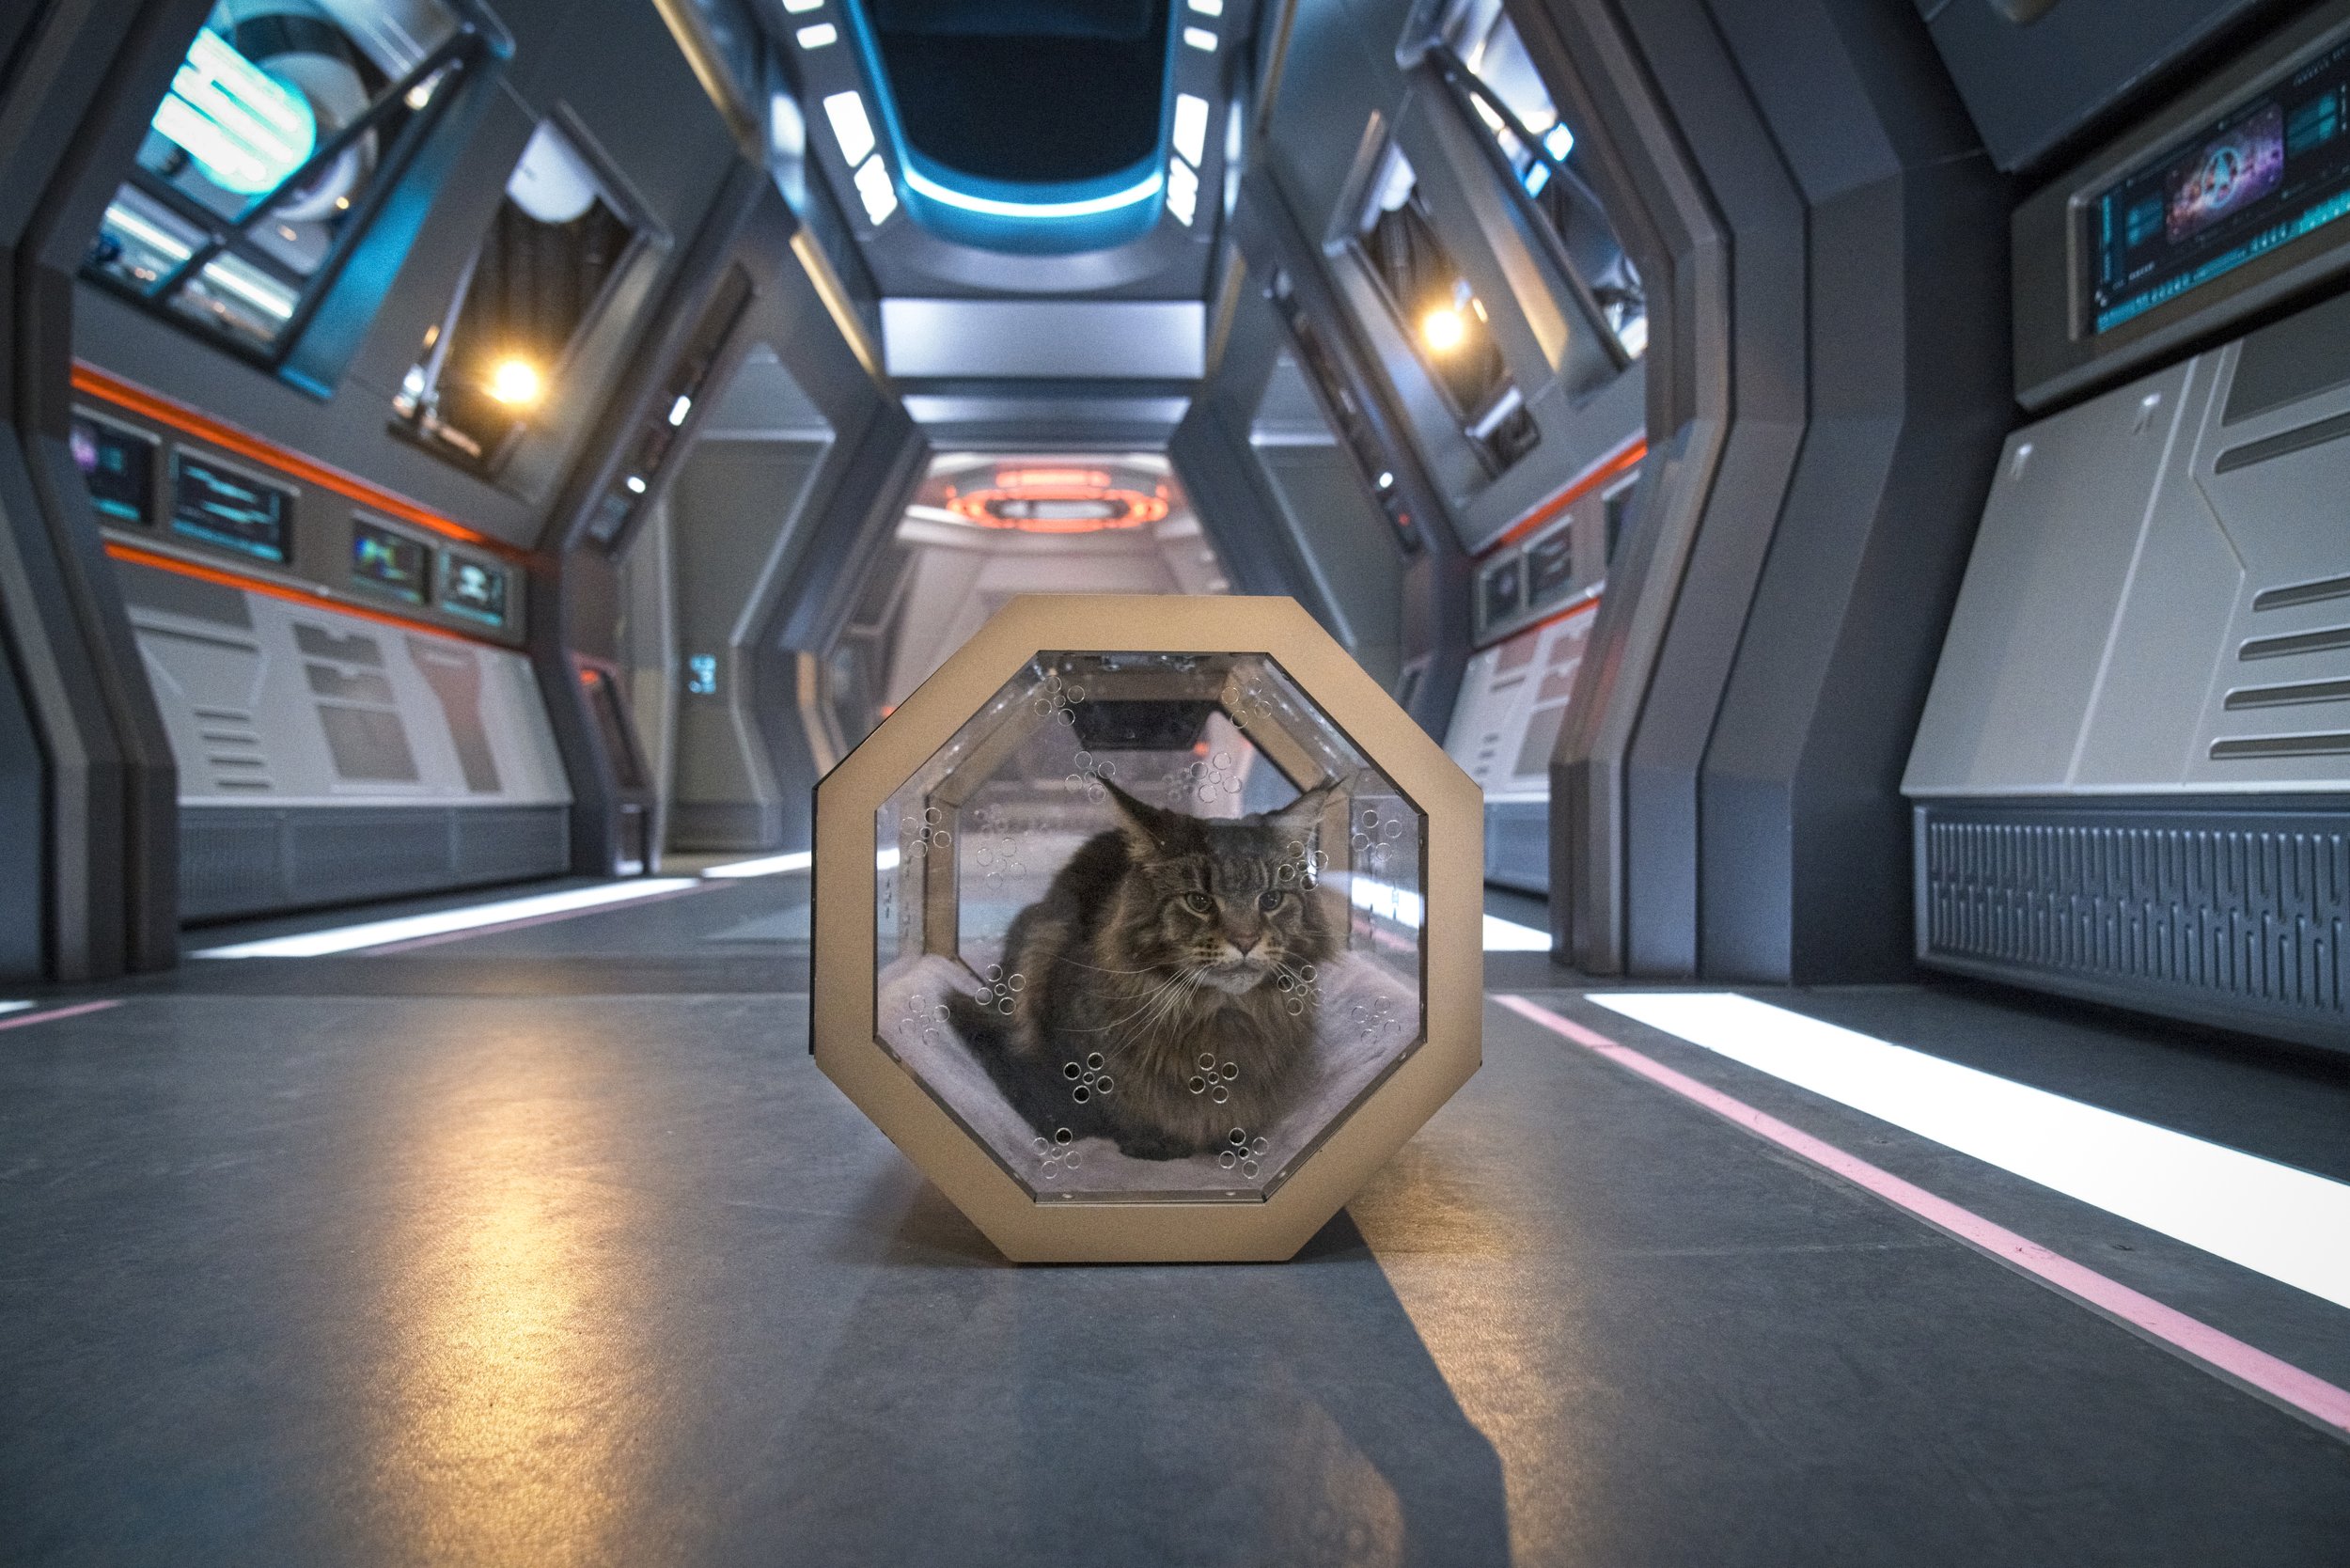   Pictured: Grudge the cat of the Paramount+ original series STAR TREK: DISCOVERY. Photo Cr: Michael Gibson/Paramount+ (C) 2021 CBS Interactive. All Rights Reserved.  